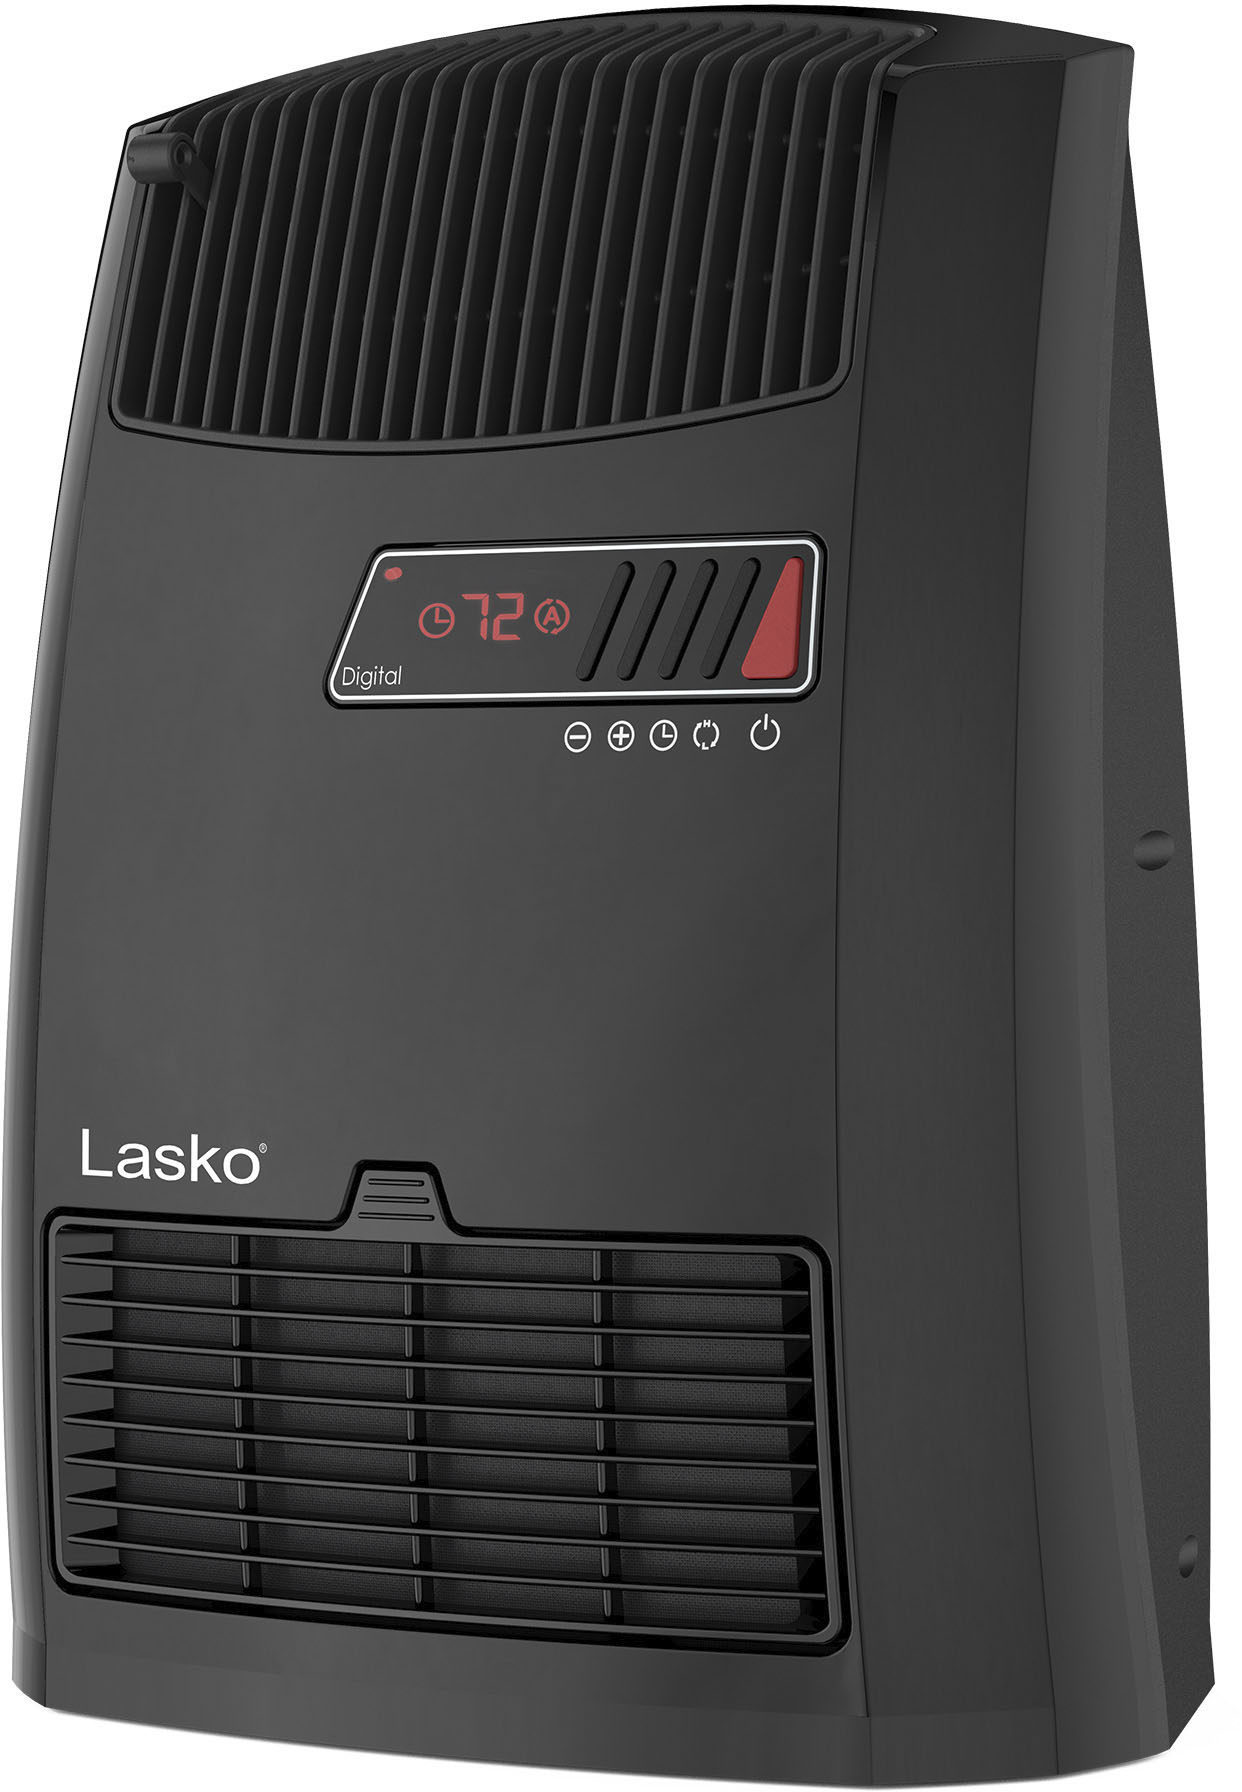 Left View: Lasko - Portable Digital Ceramic Space Heater with Warm Air Motion Technology - Black